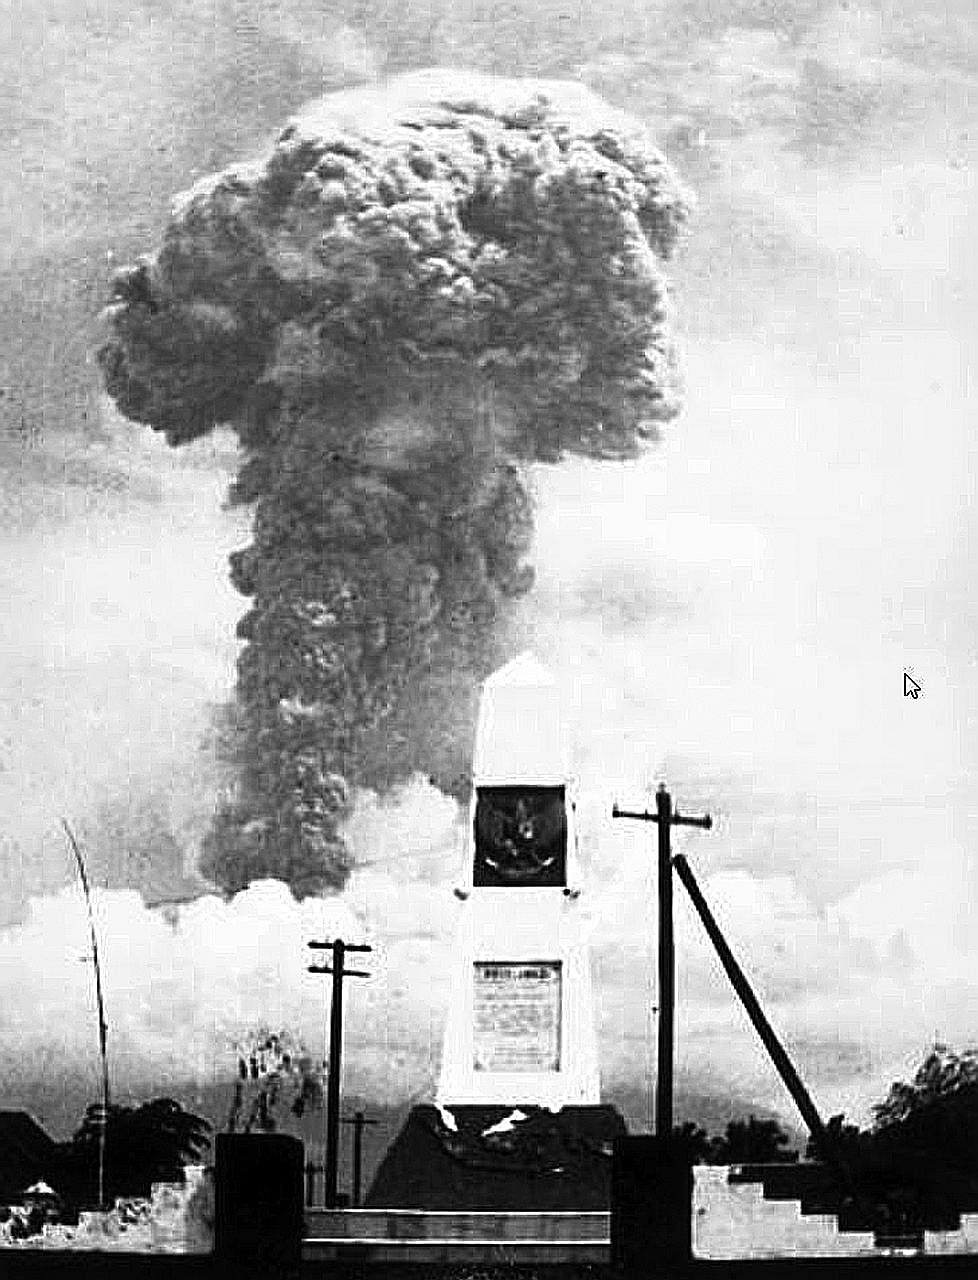 An eruption column towering over Mount Agung on March 12, 1963. The major eruption of the Indonesian volcano that year left about 1,700 people dead and destroyed several villages.